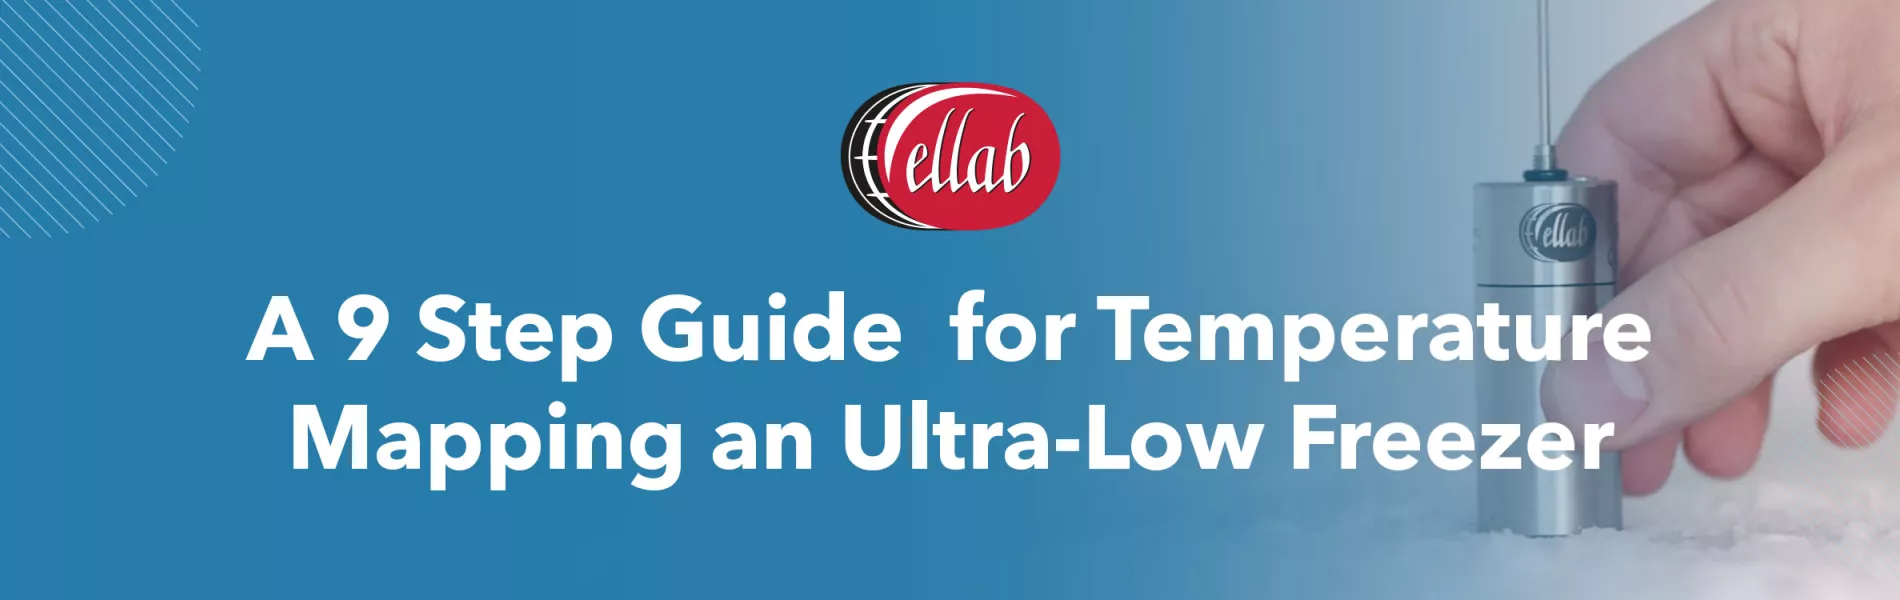 A 9 Step Guide for Temperature Mapping an Ultra-Low Freezer